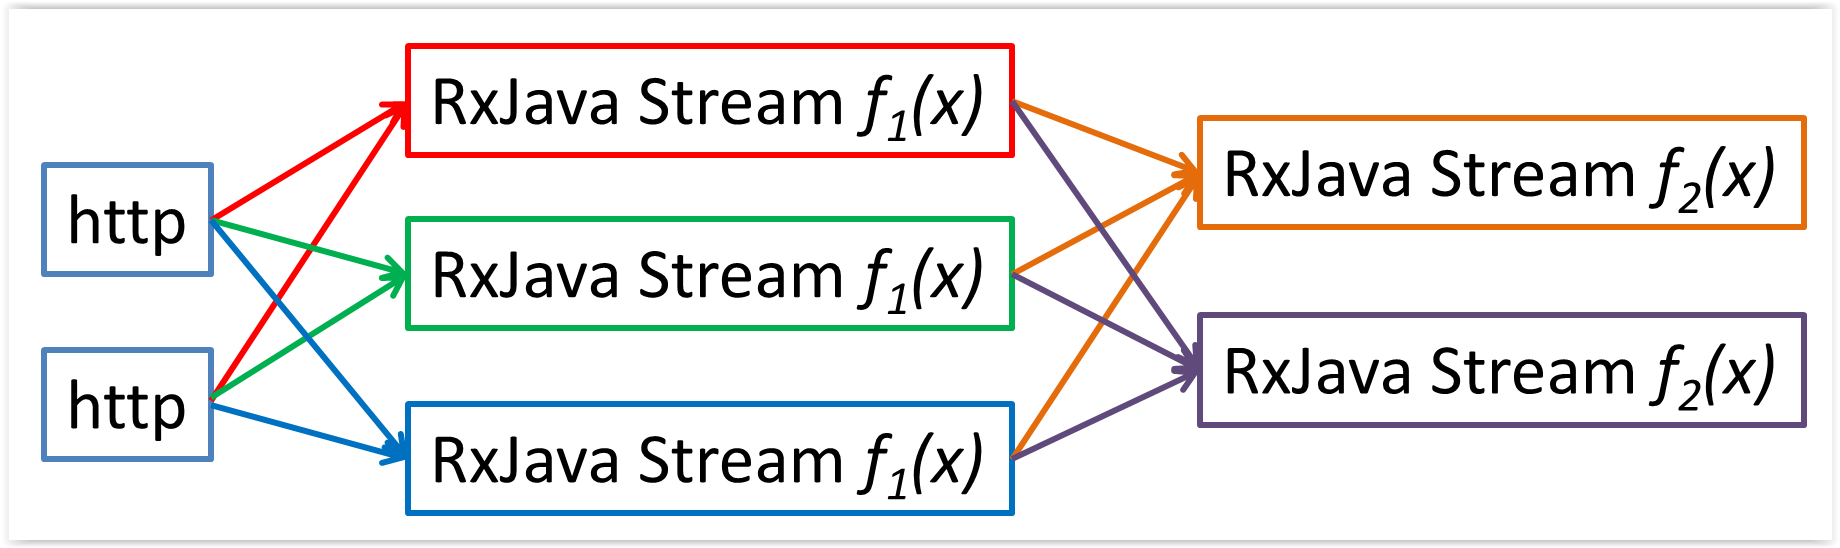 Spring XD stream deployment with multiple layers of RxJava processing modules